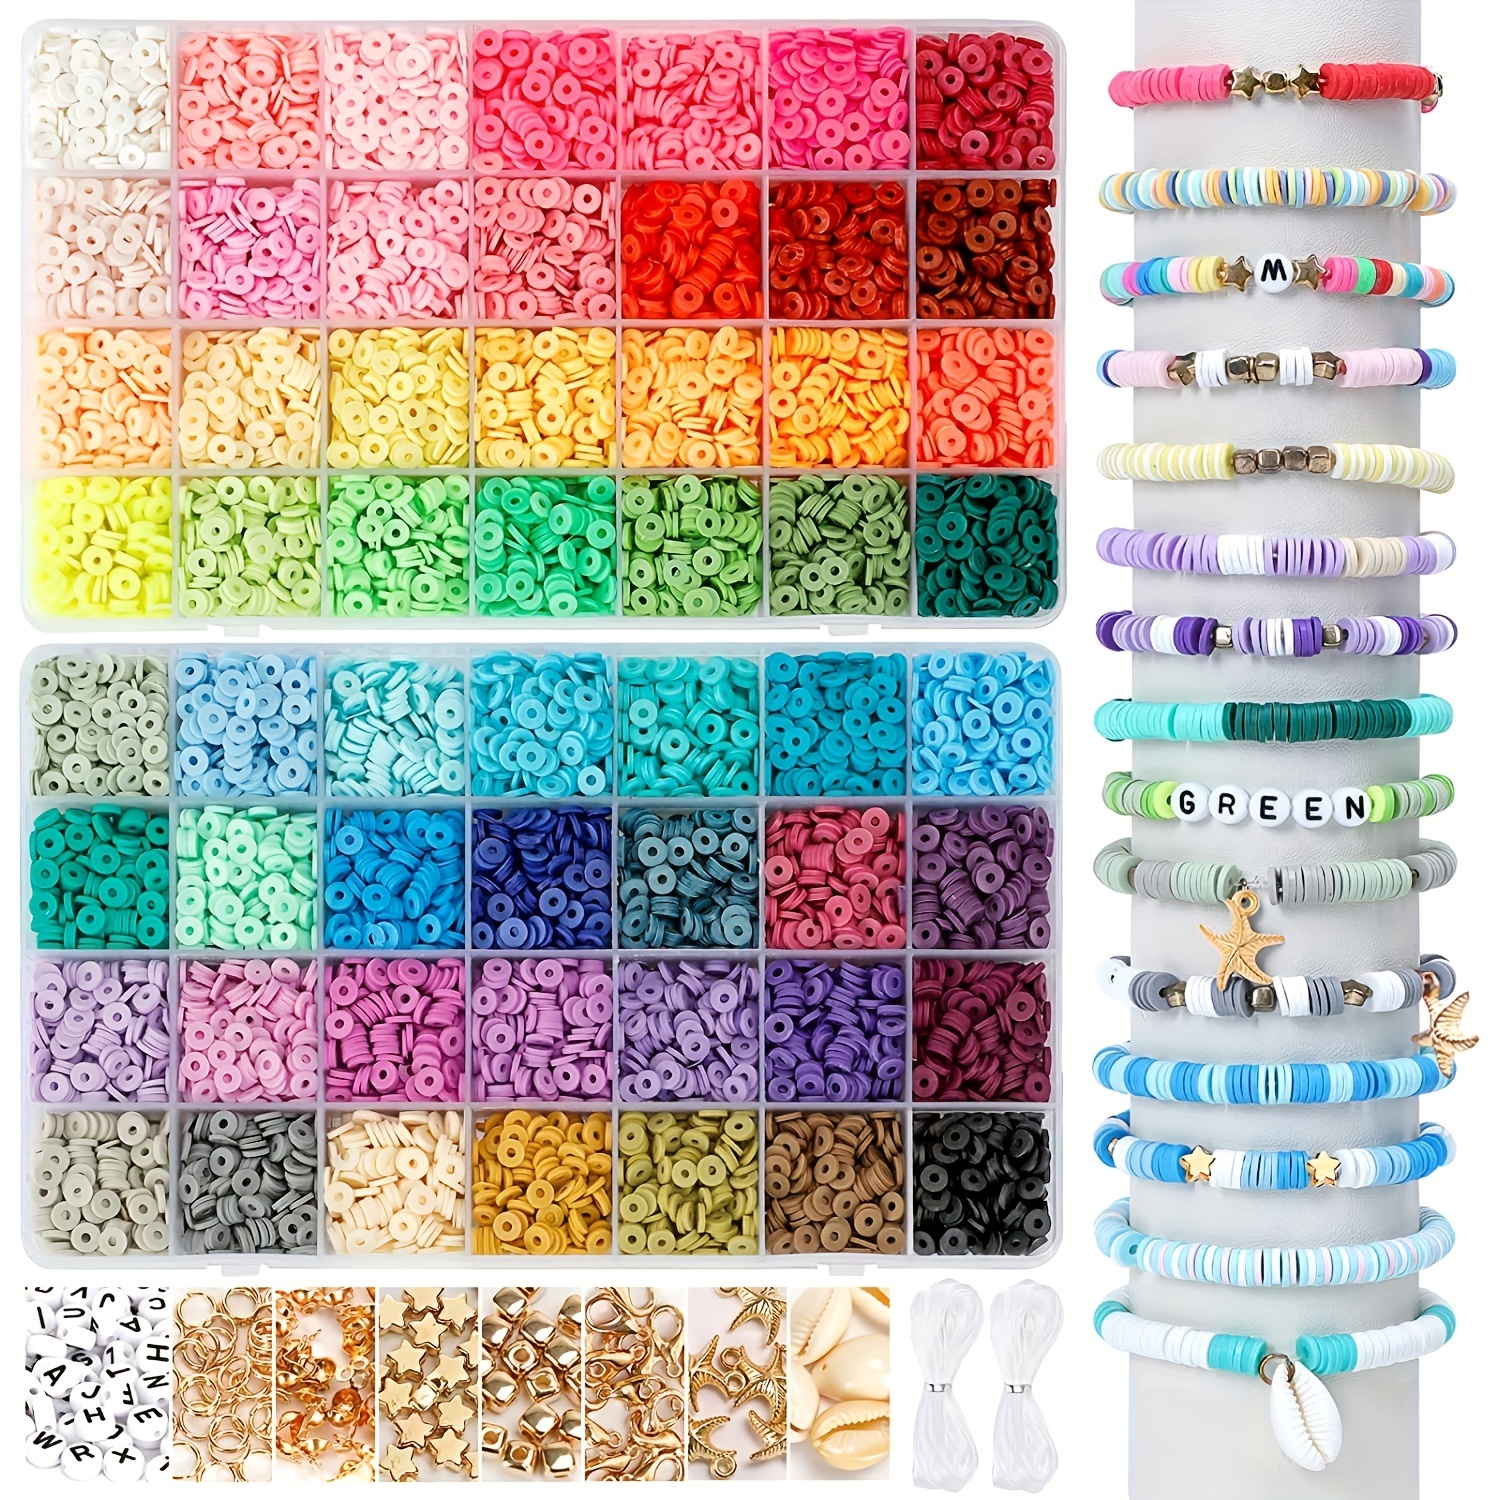 6600pcs Clay Beads for Bracelet Making,Bracelet Making Kit 6mm 24 Colors  Flat Round Polymer Clay Spacer Beads with Letter Beads Charms Elastic  Strings